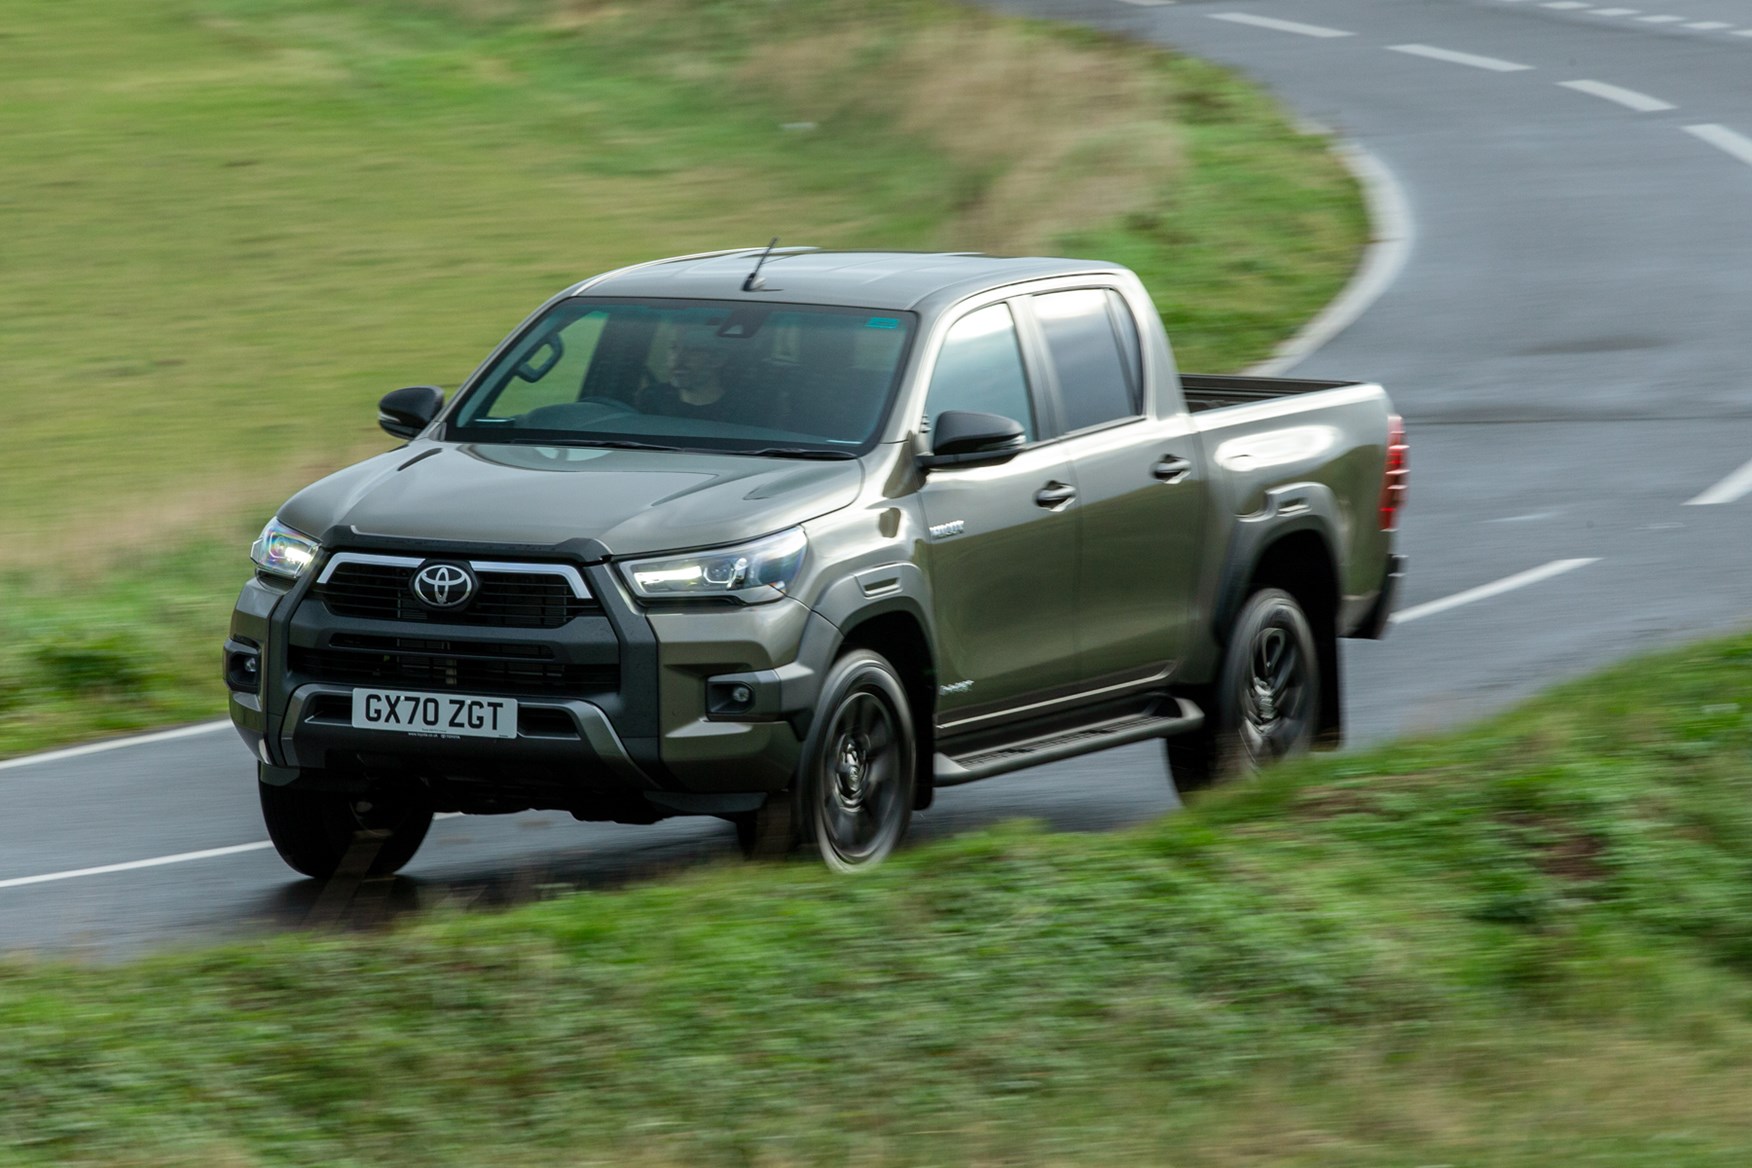 Toyota Hilux review, 2020 facelift, Invincible X, driving round corner, front view, bronze